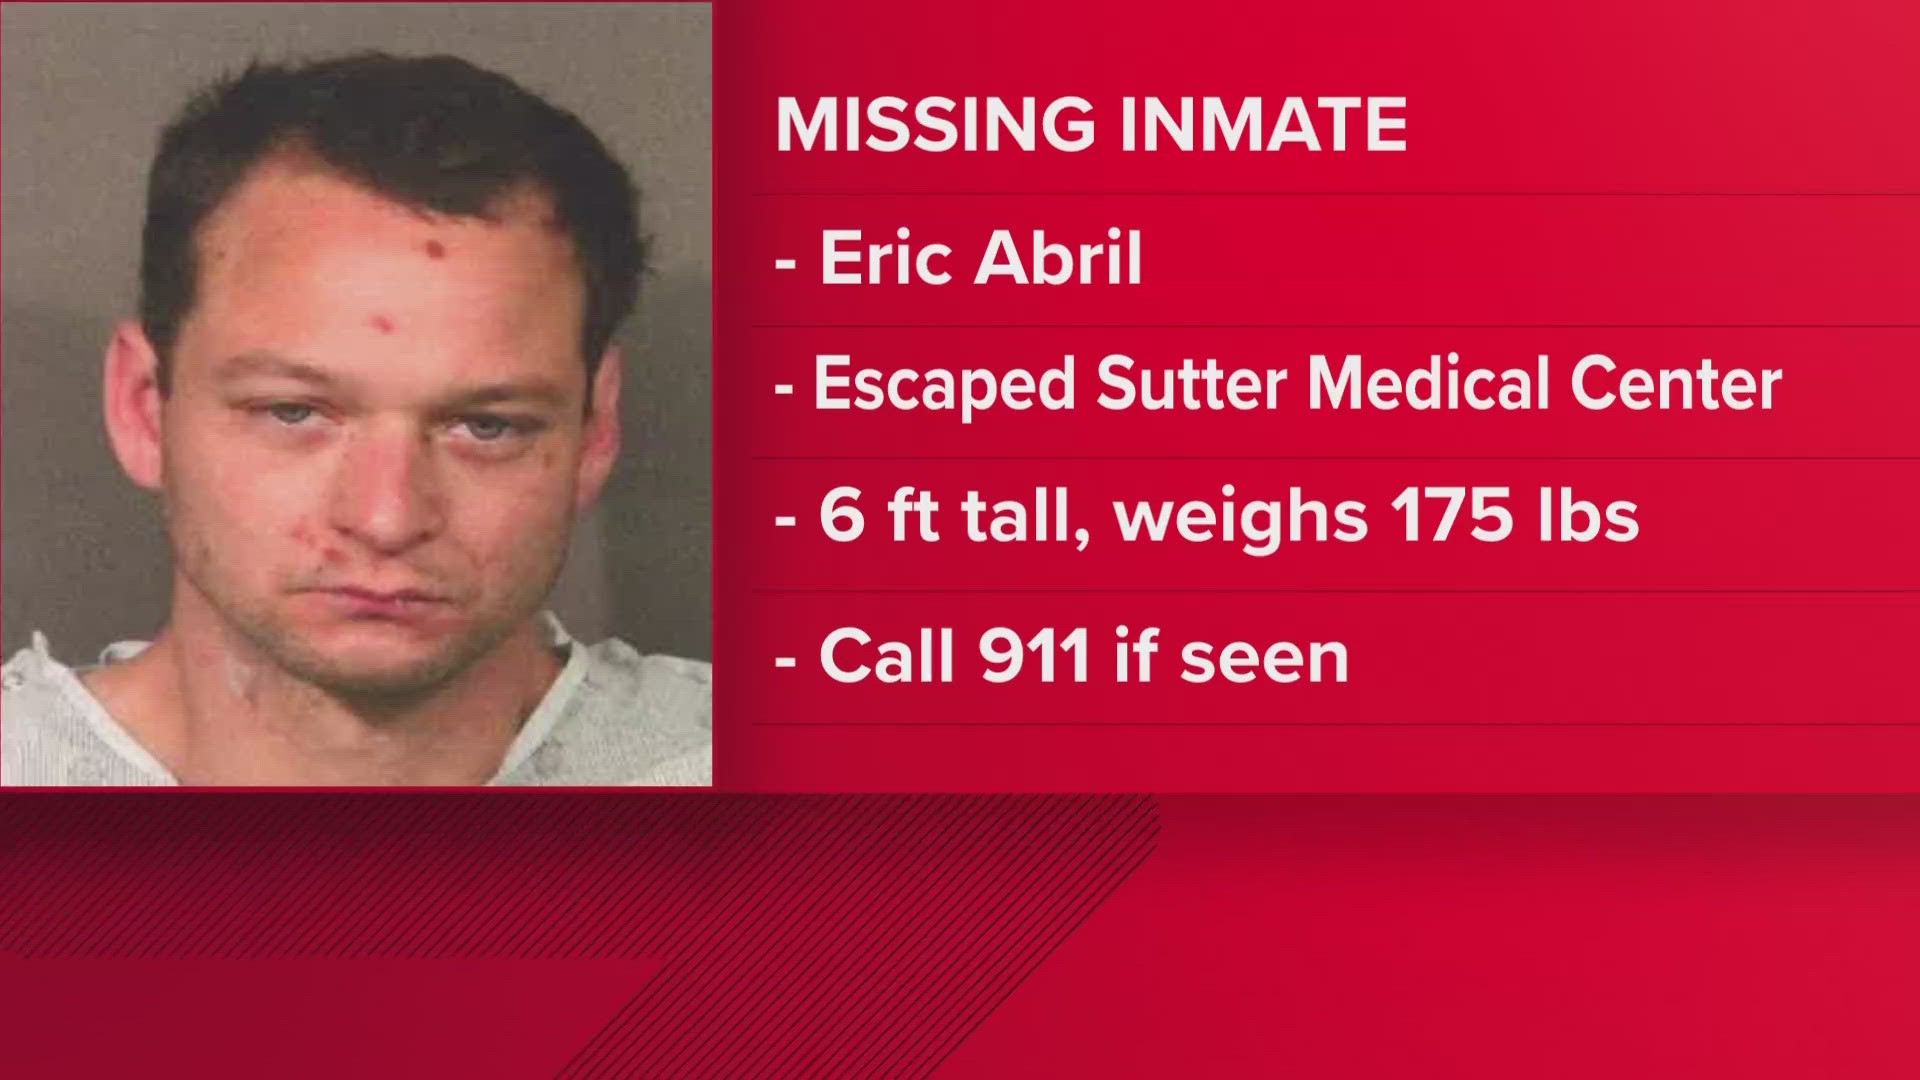 Law enforcement are searching for the man charged in an April hostage shooting that escaped from custody overnight.